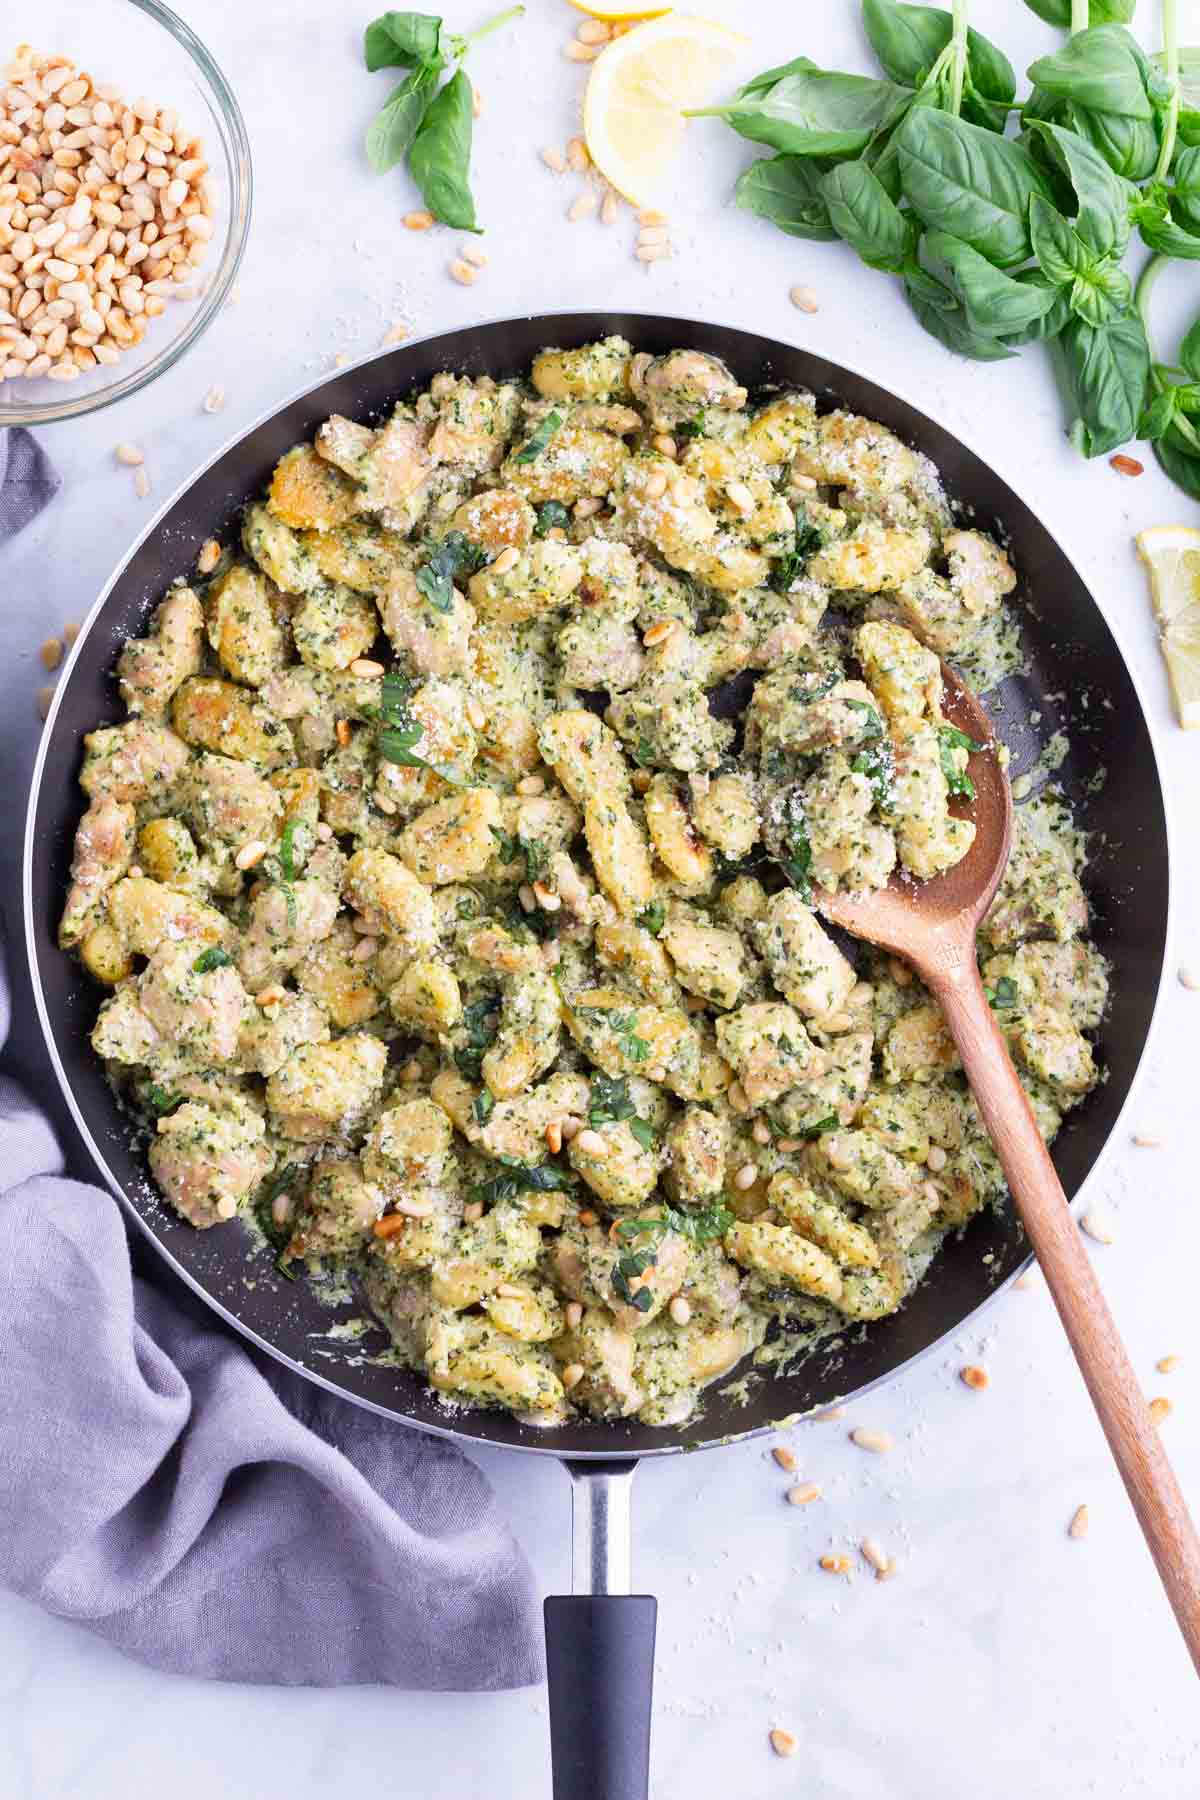 A wooden spoon is used to serve creamy pesto chicken gnocchi from a skillet.